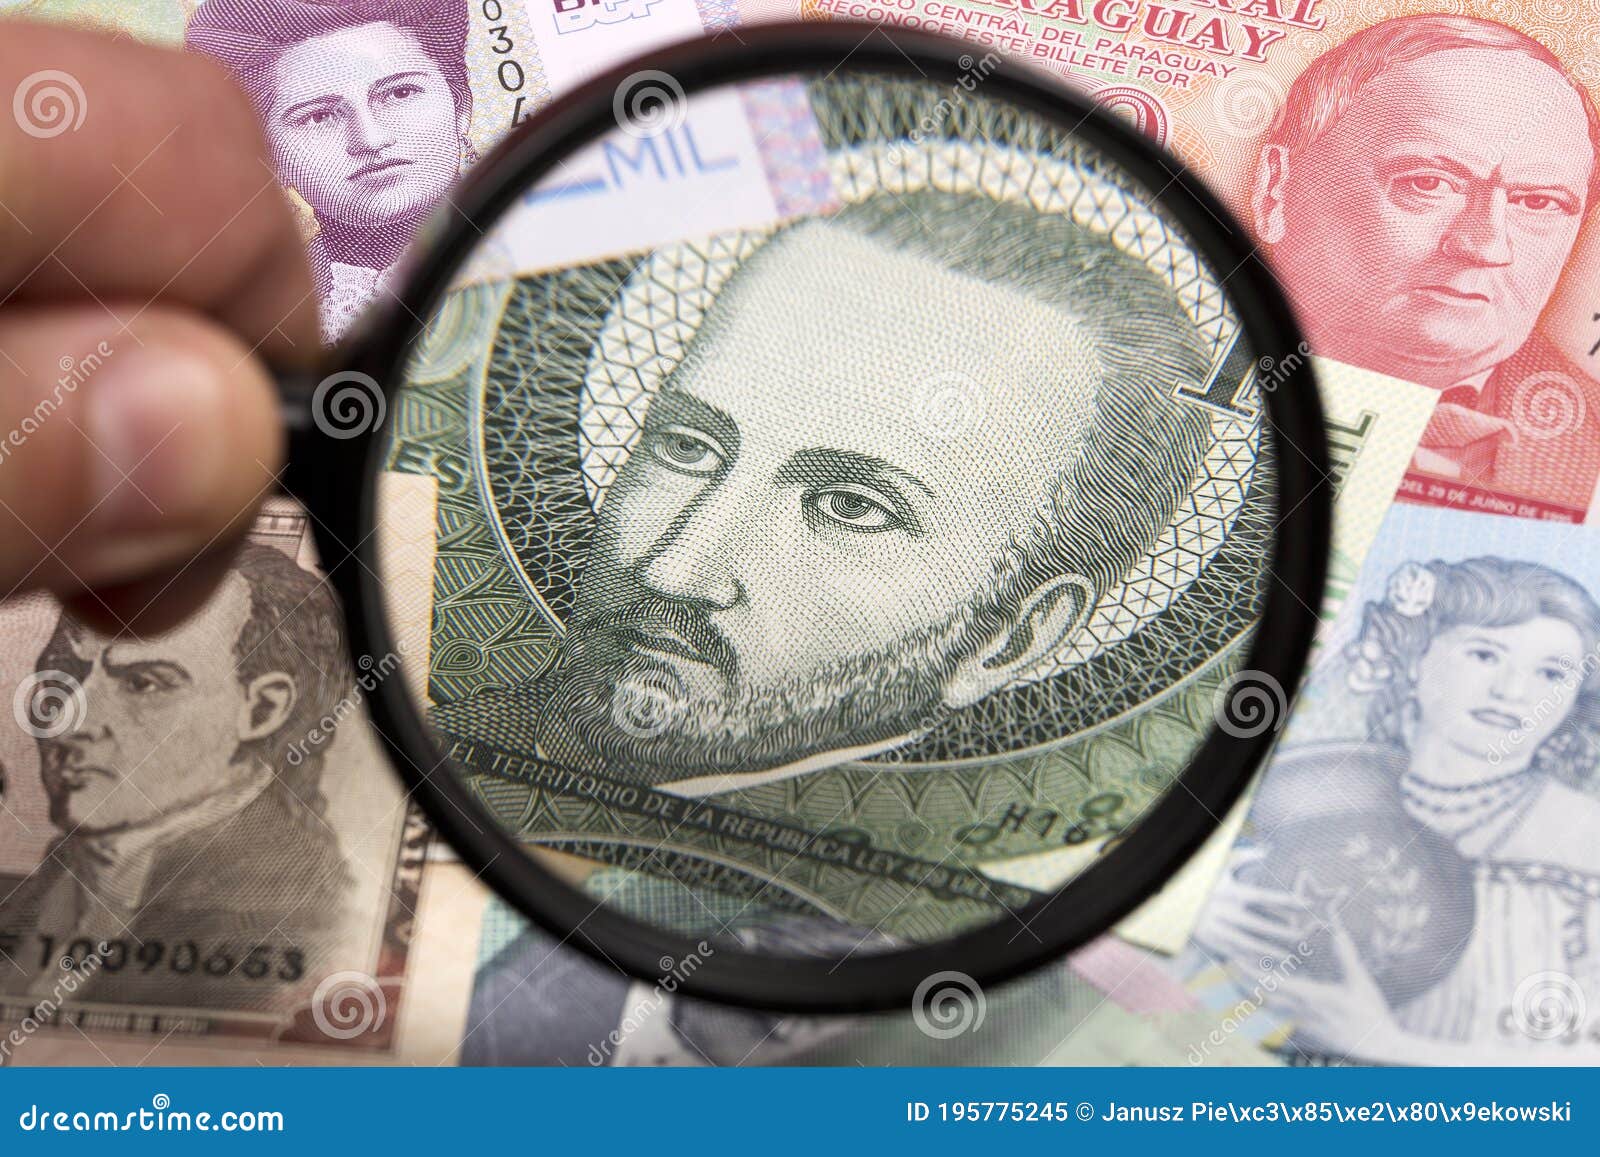 paraguayan money in a magnifying glass